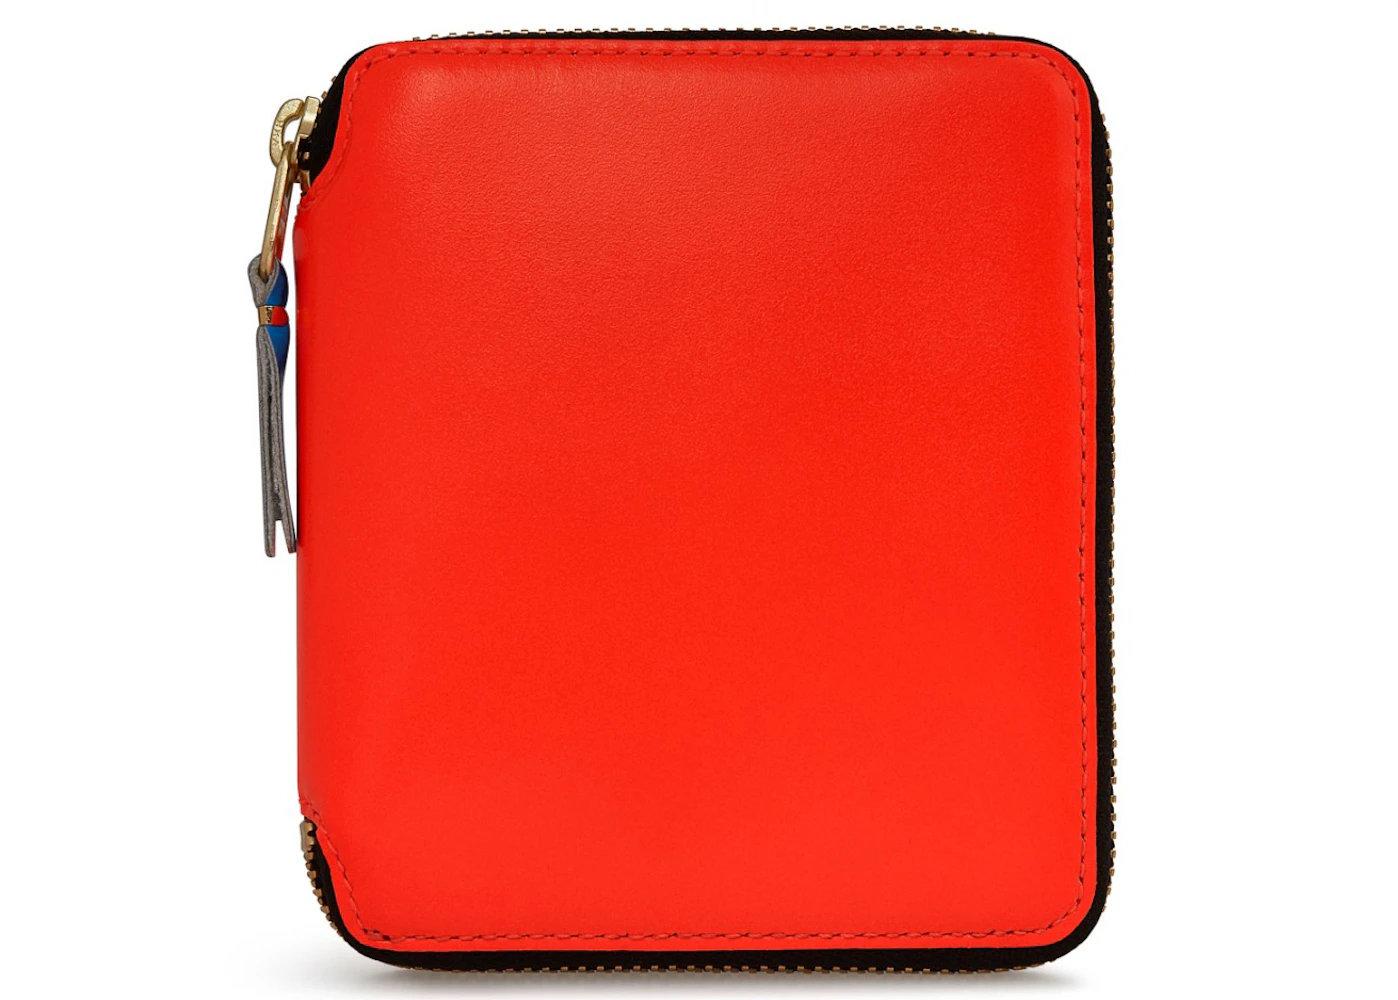 Comme des Garcons SA2100SF Super Fluo Wallet Orange in Leather with ...